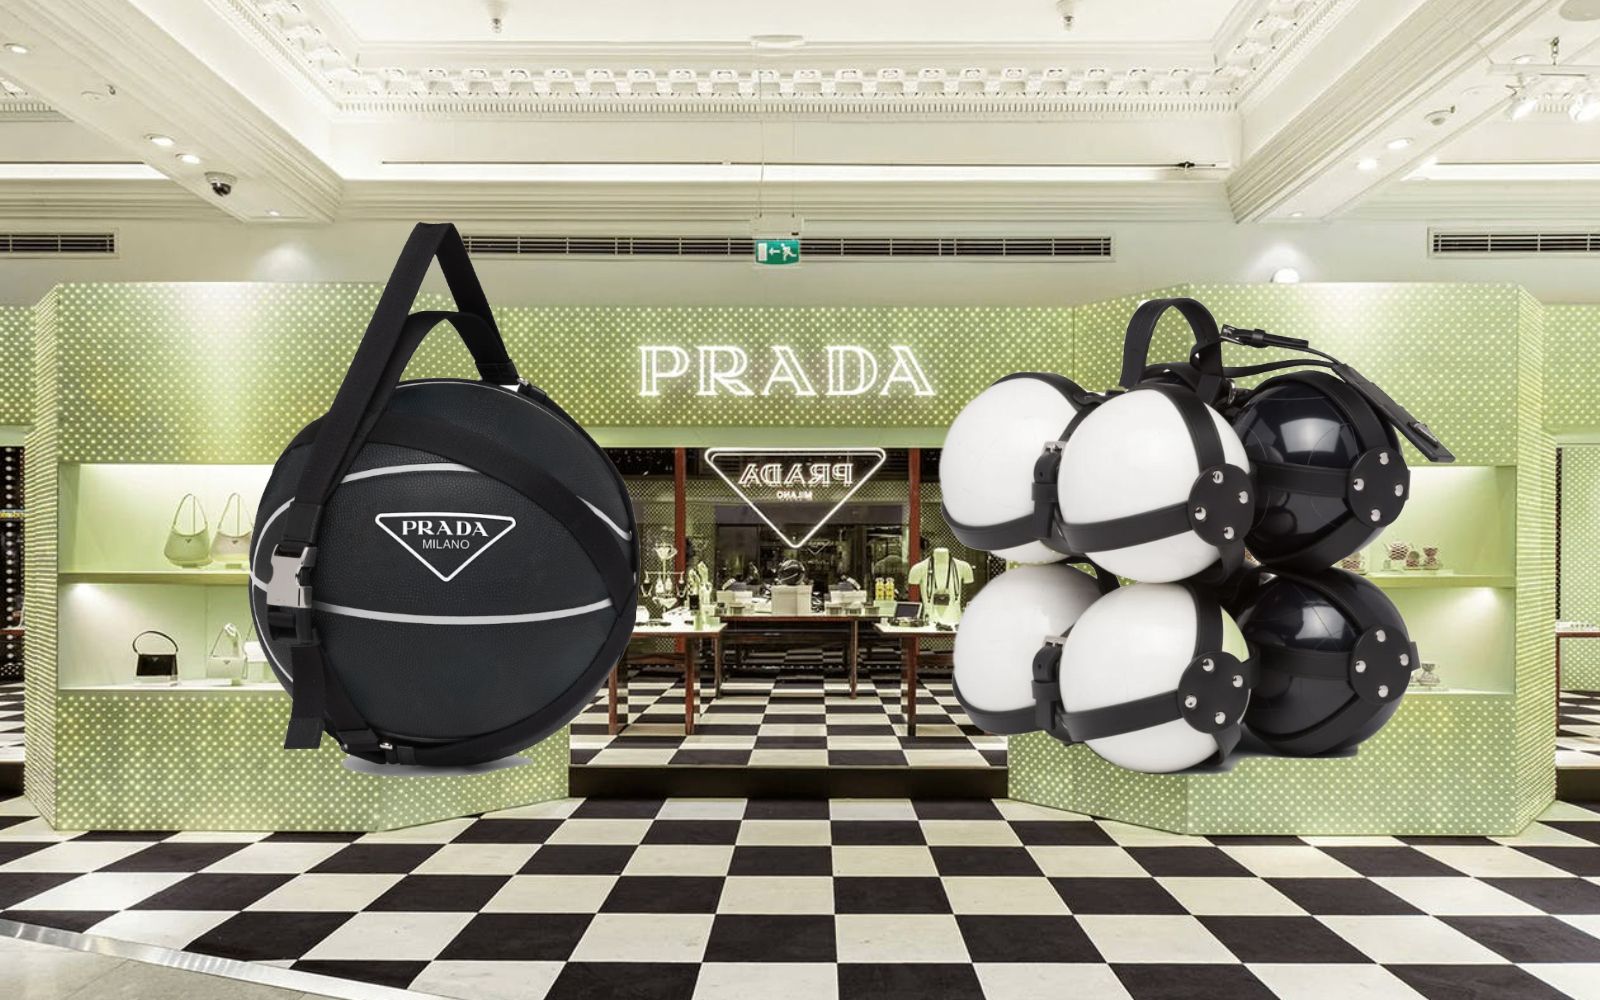 5 Prada accessories you didn't know you needed